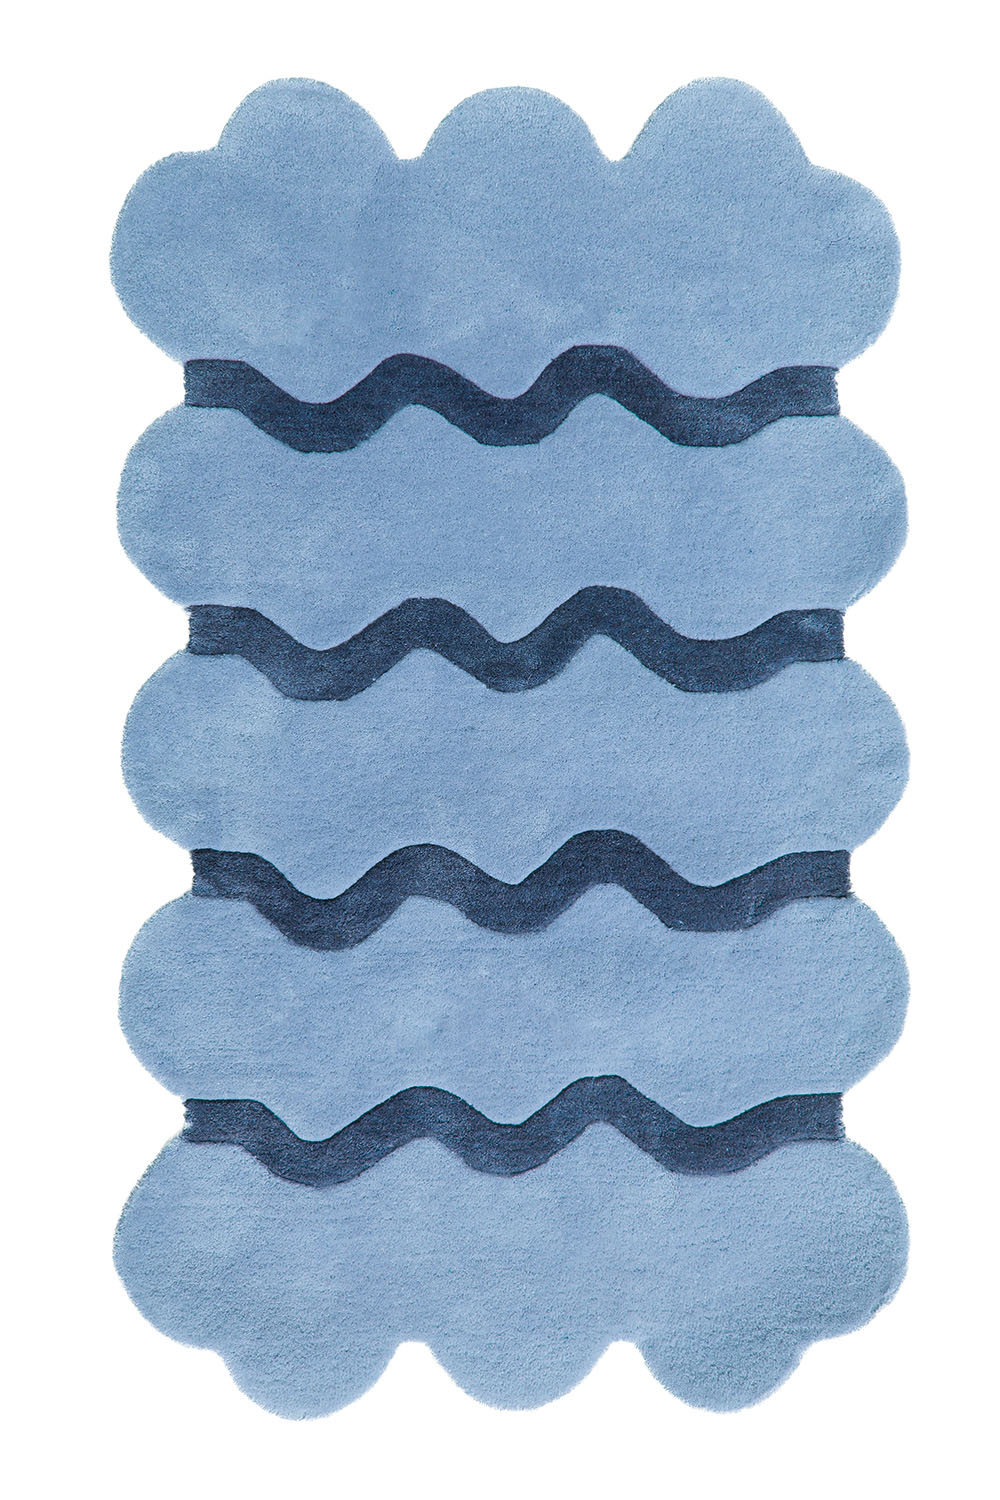 Sculpted Edge Hand Tufted Wool Rug in Blue by Jubi